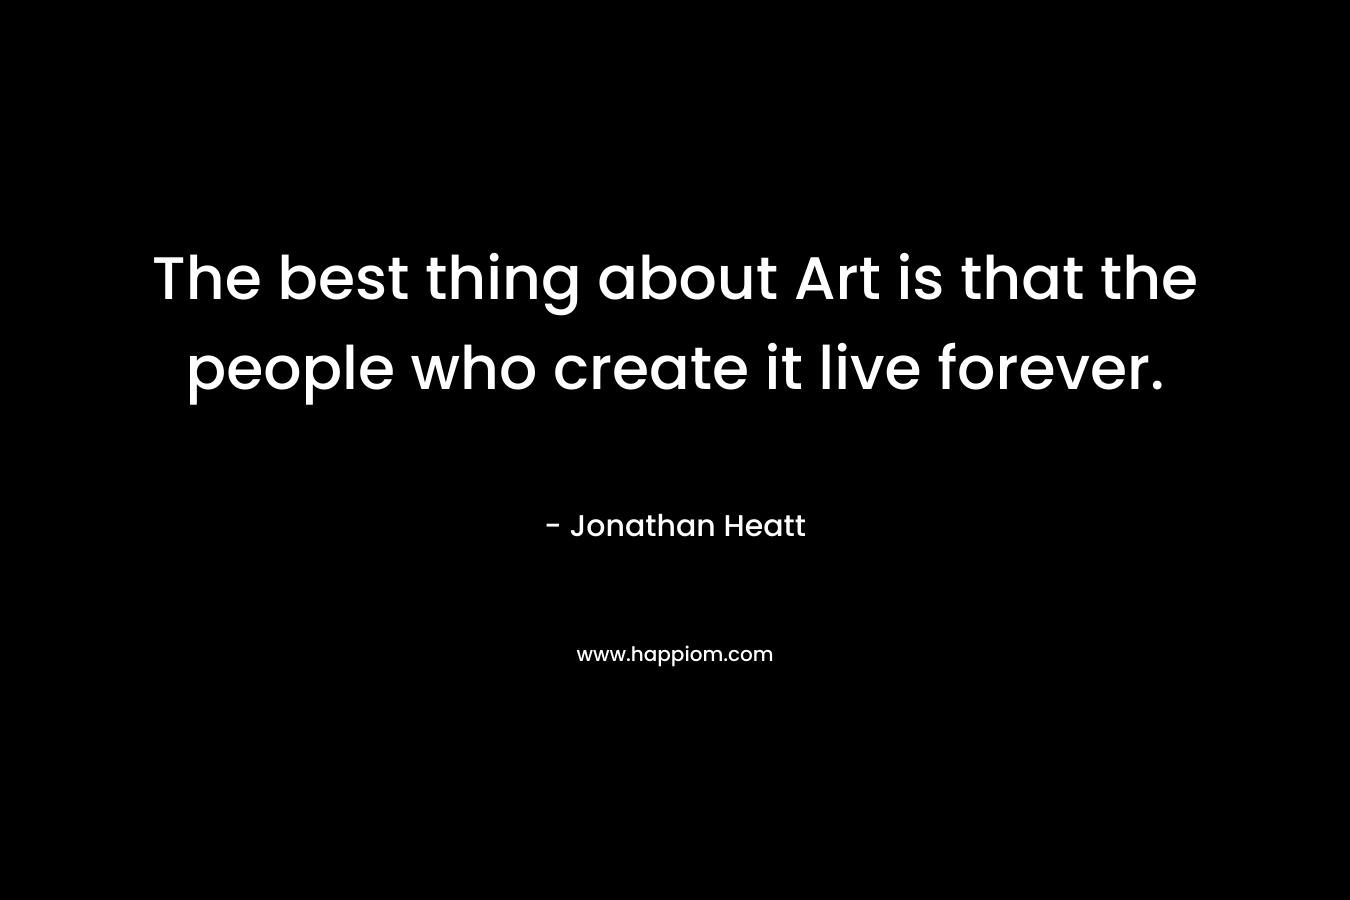 The best thing about Art is that the people who create it live forever.